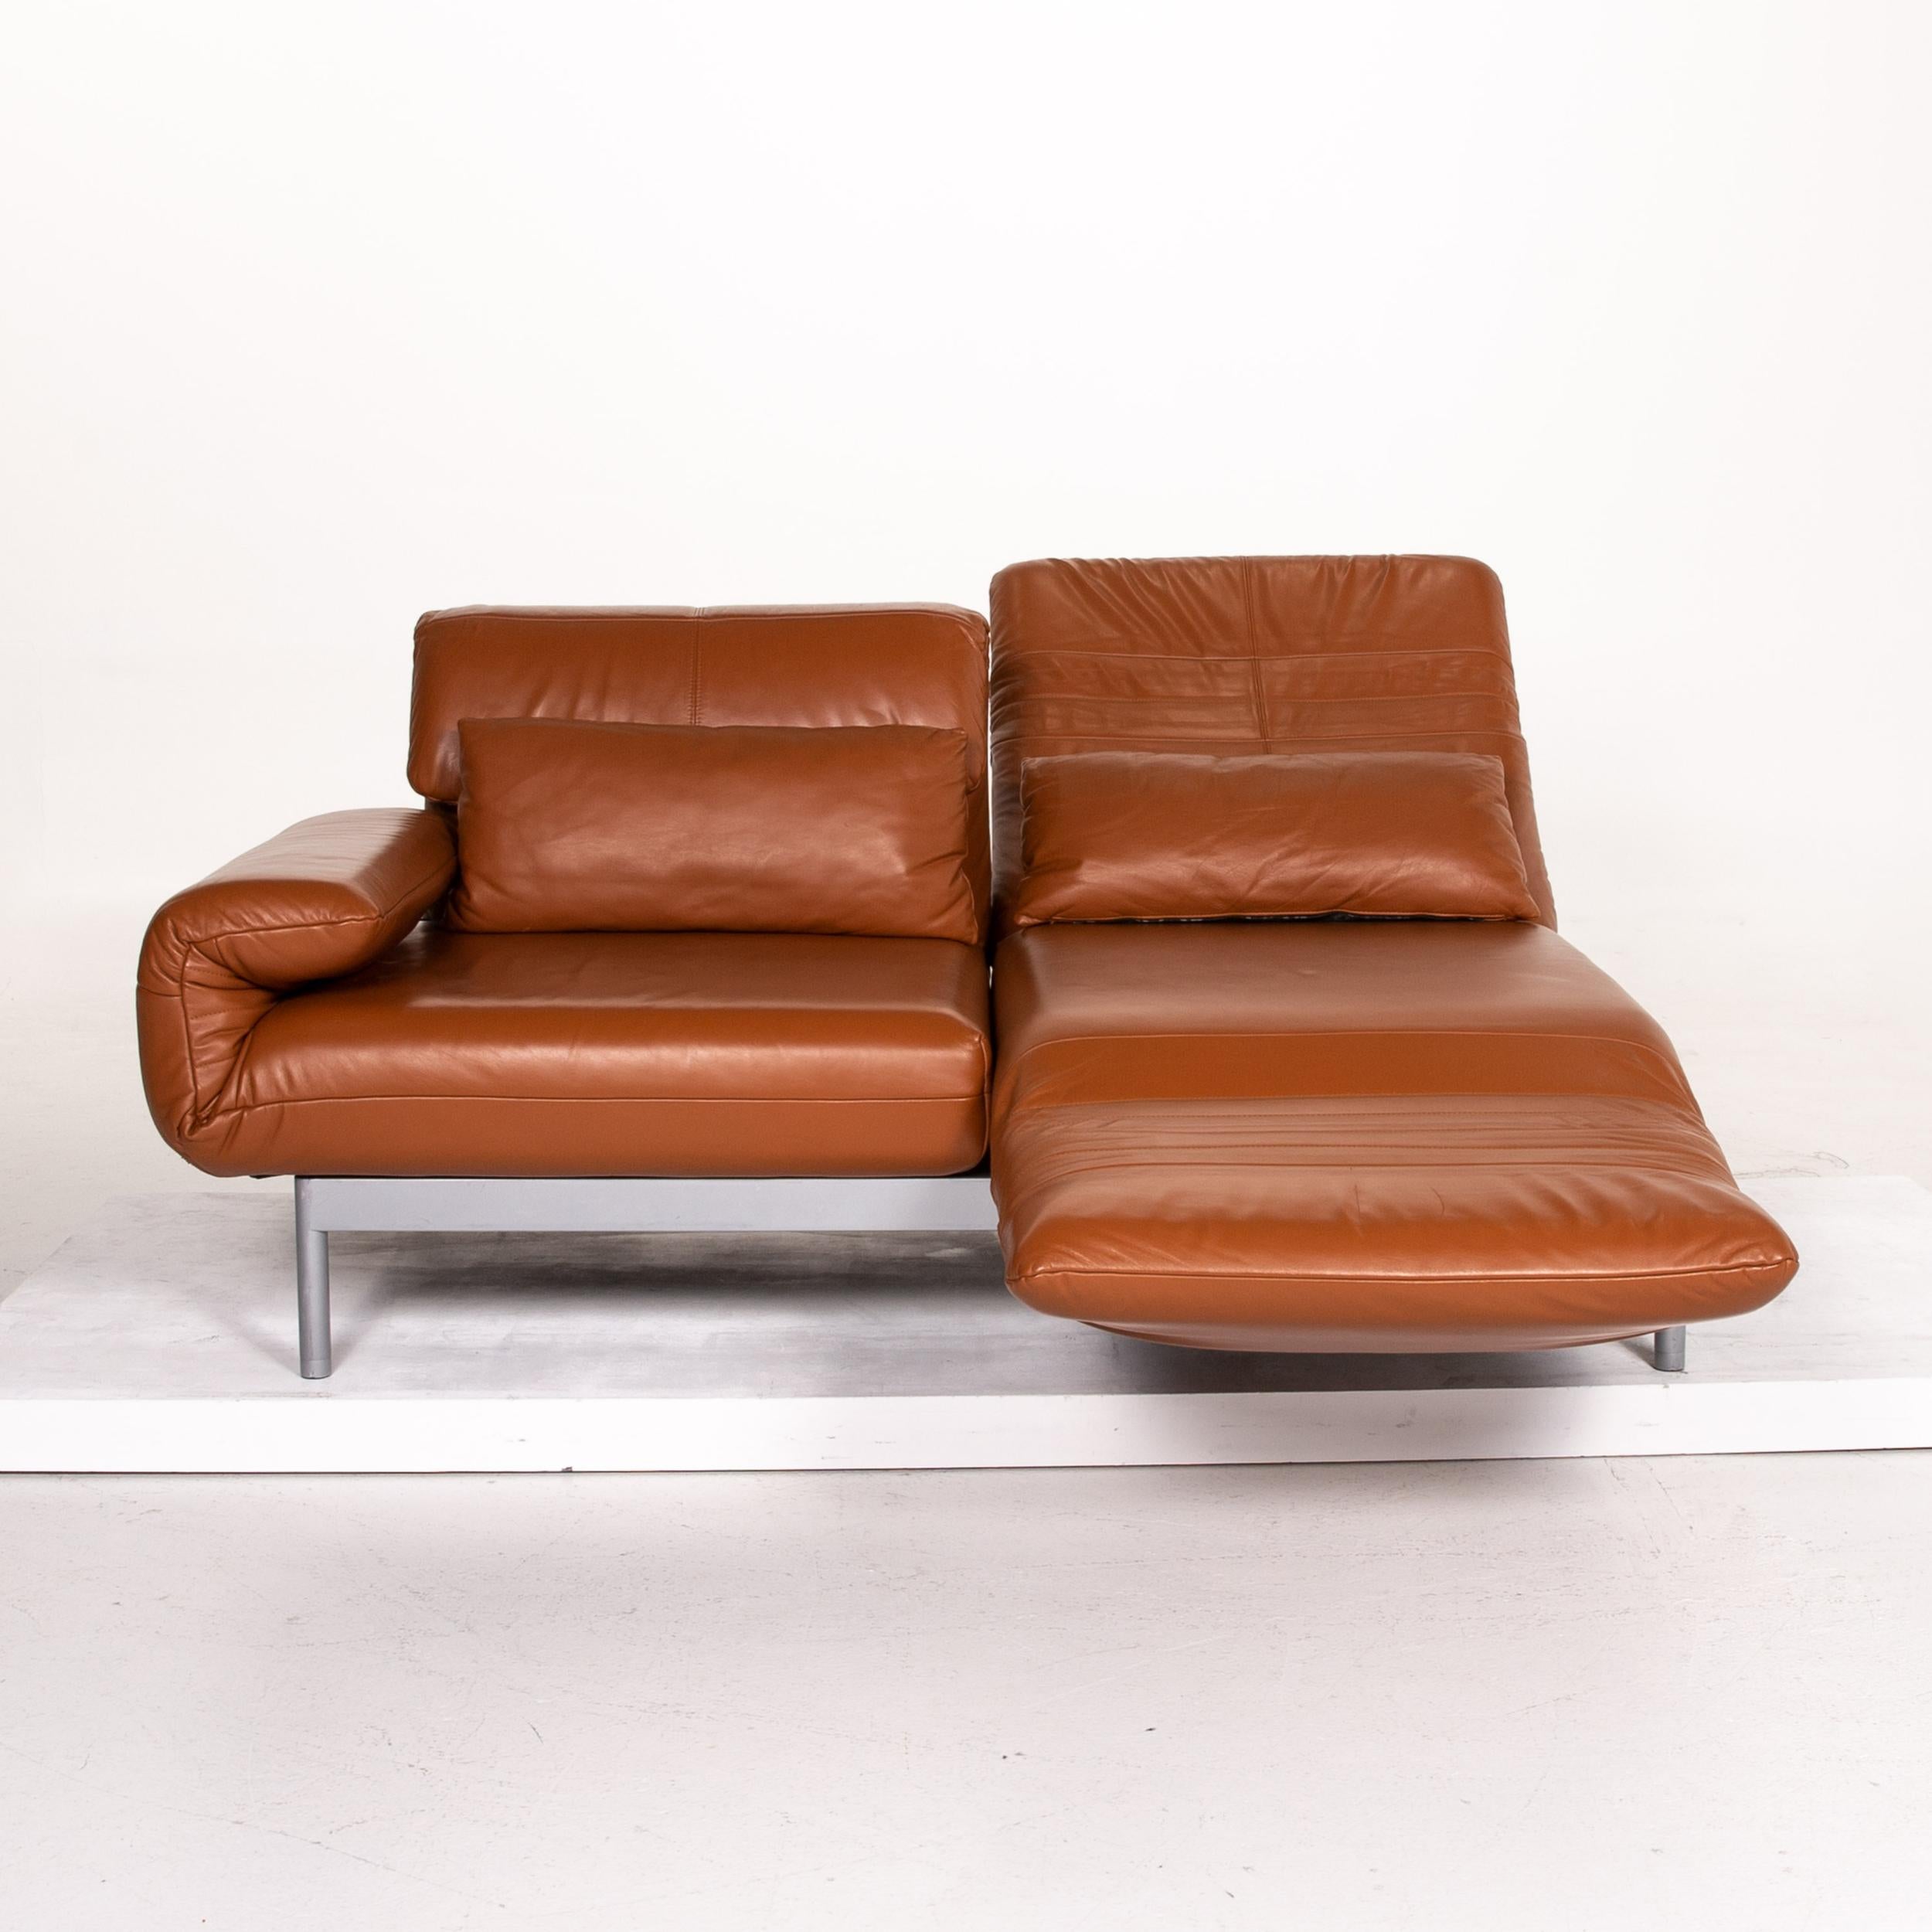 Contemporary Rolf Benz Plura Leather Sofa Cognac Brown Two-Seat Function Relax Function